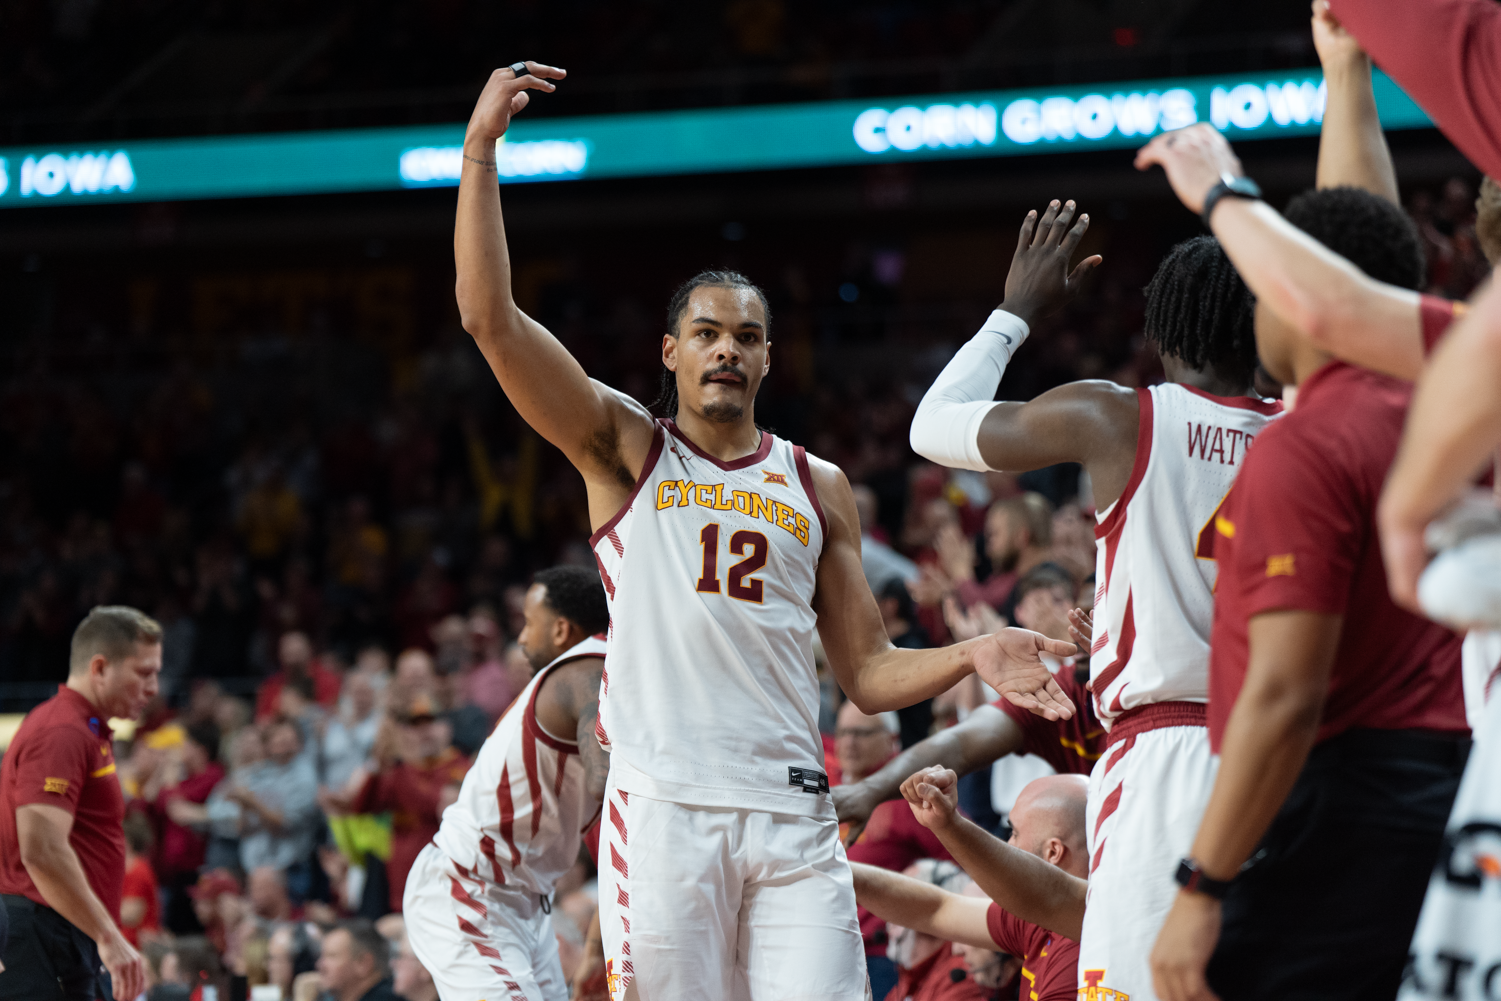 Robert Jones urges the crowd to get on their feet after making four consecutive free throws against Houston at Hilton Coliseum on Jan. 9, 2023.